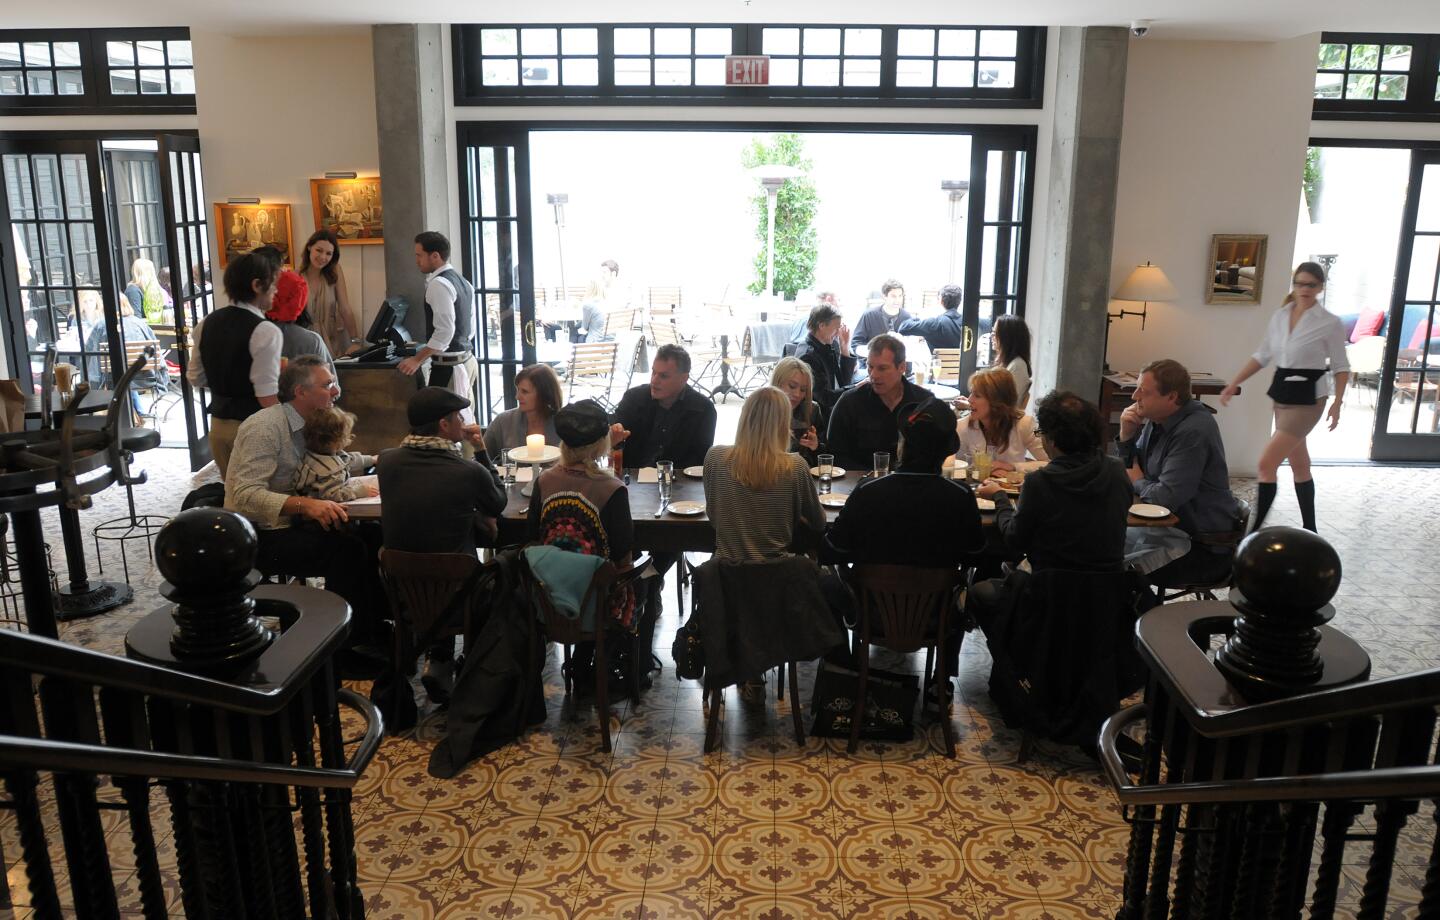 Palihouse holds a traditional English roast every Sunday that attracts many of L.A.'s growing British expat community.